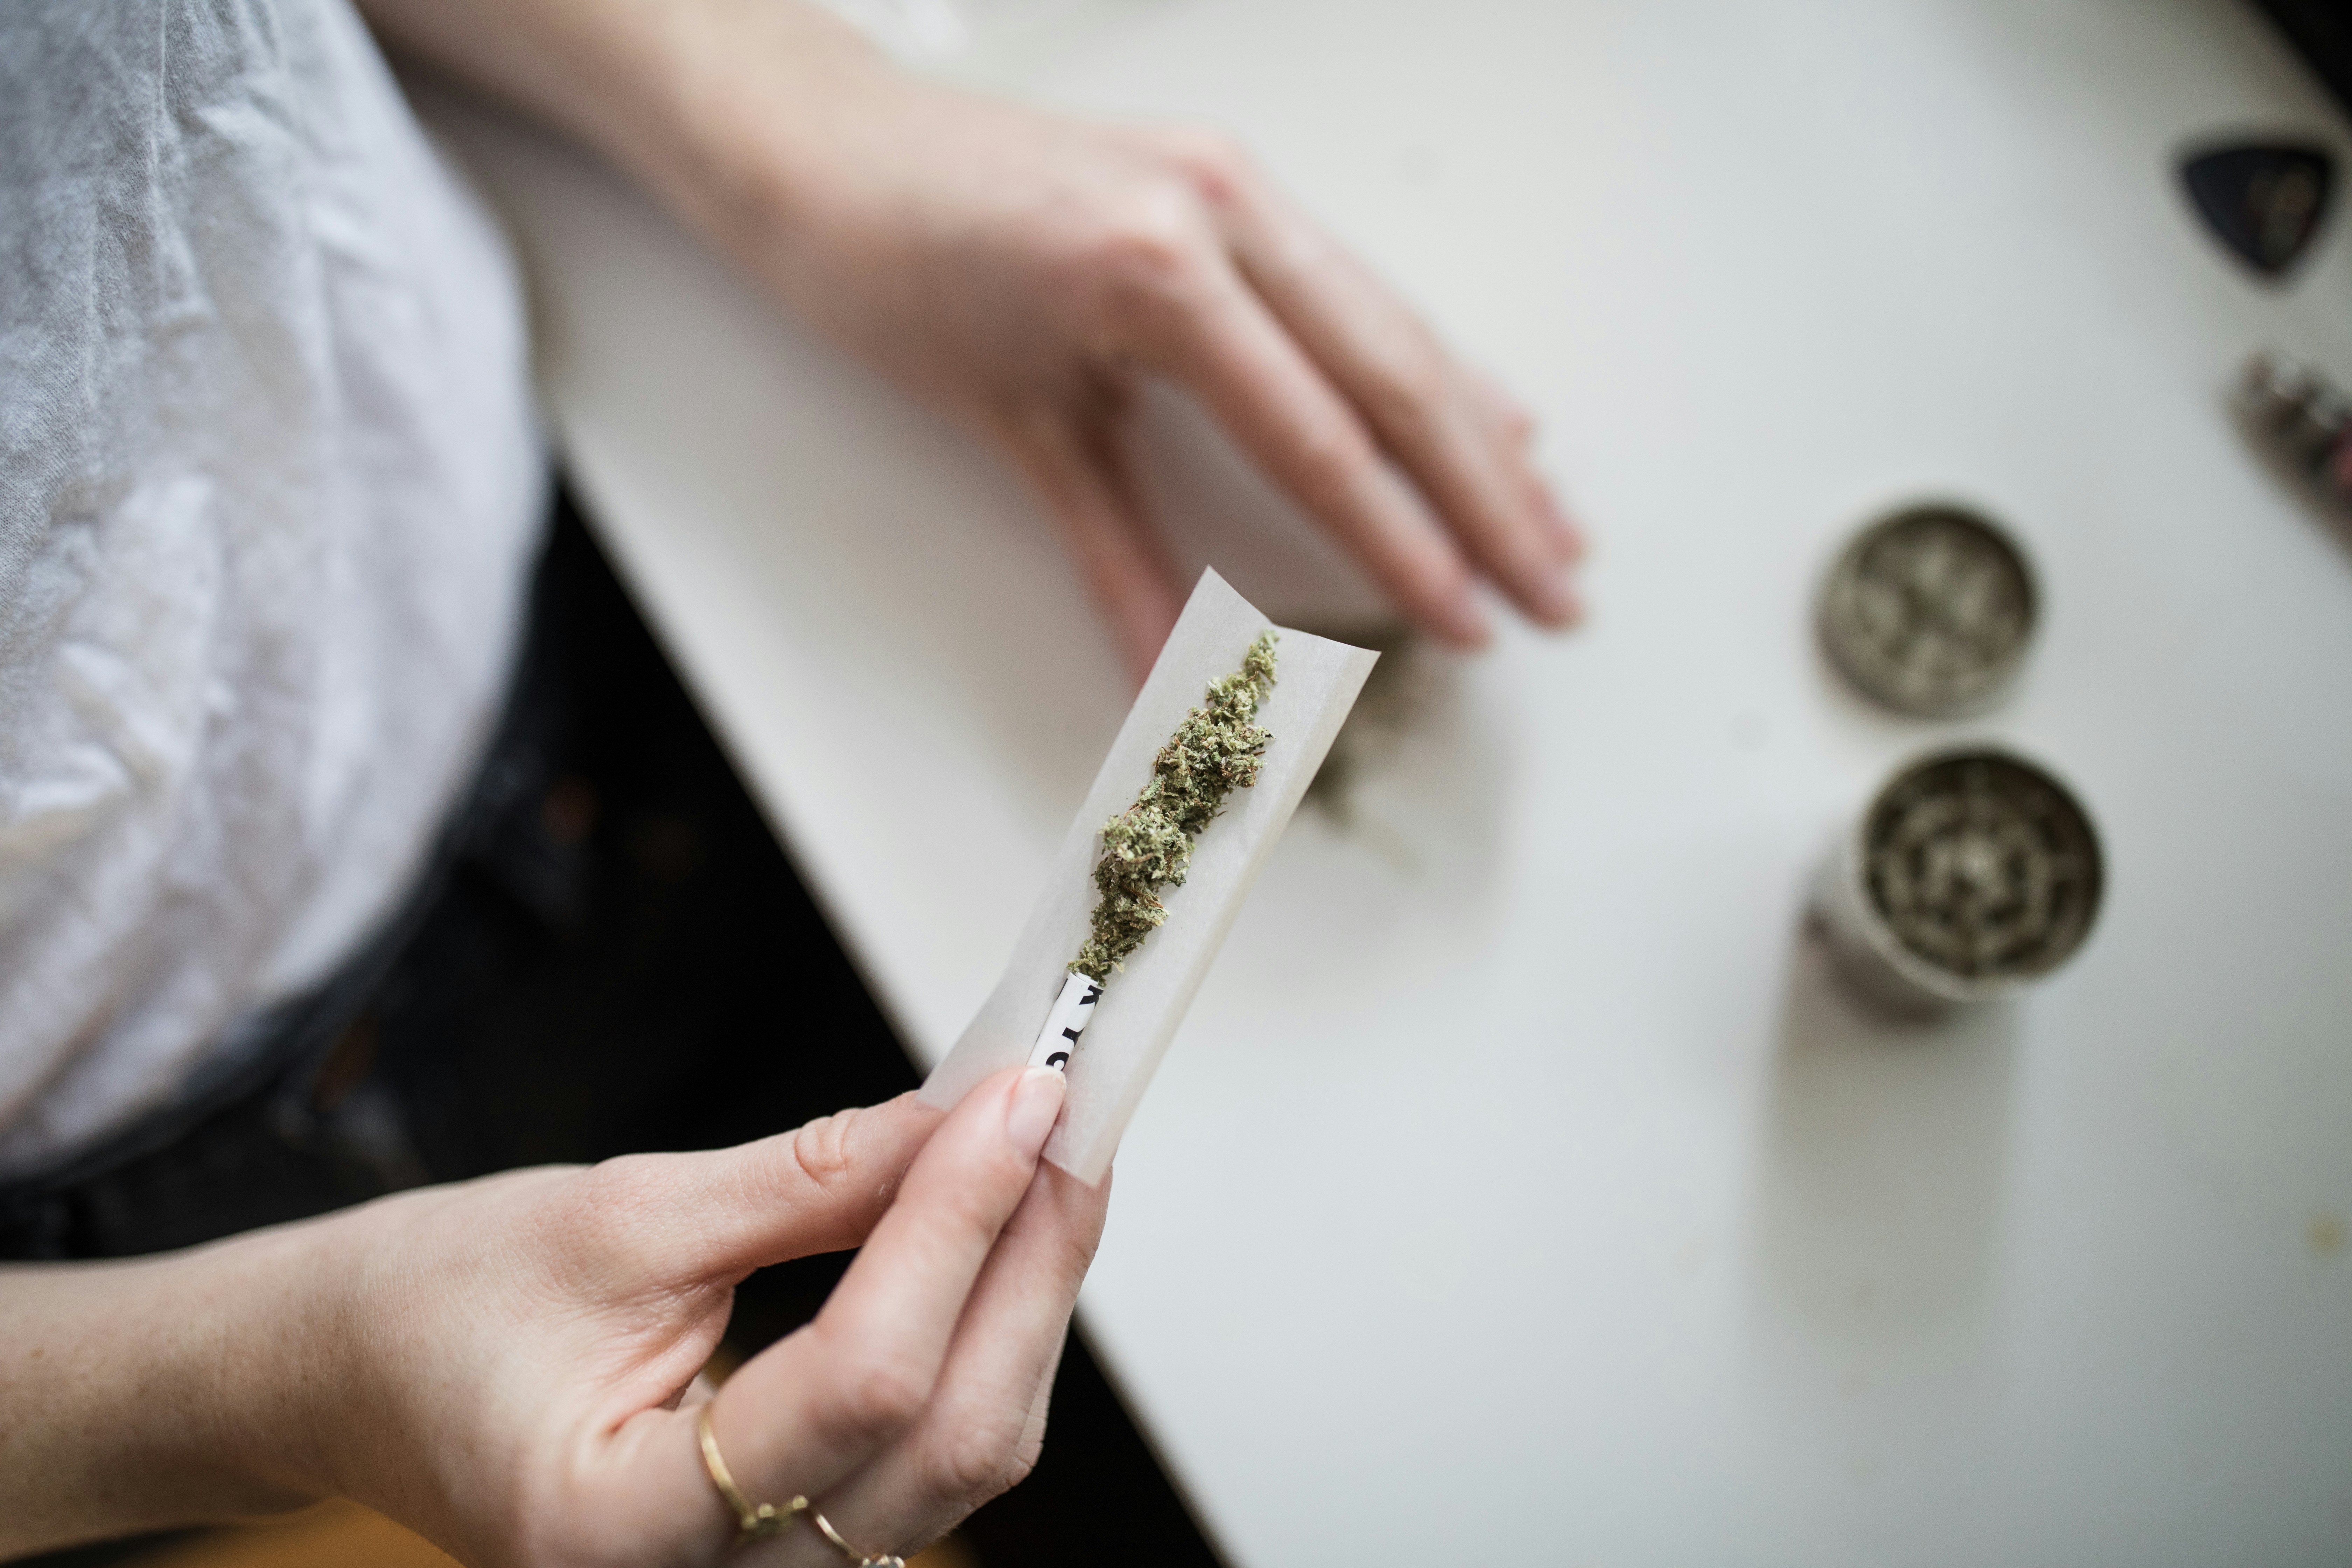 Employees are more likely to apply for jobs that offer cannabis care benefits